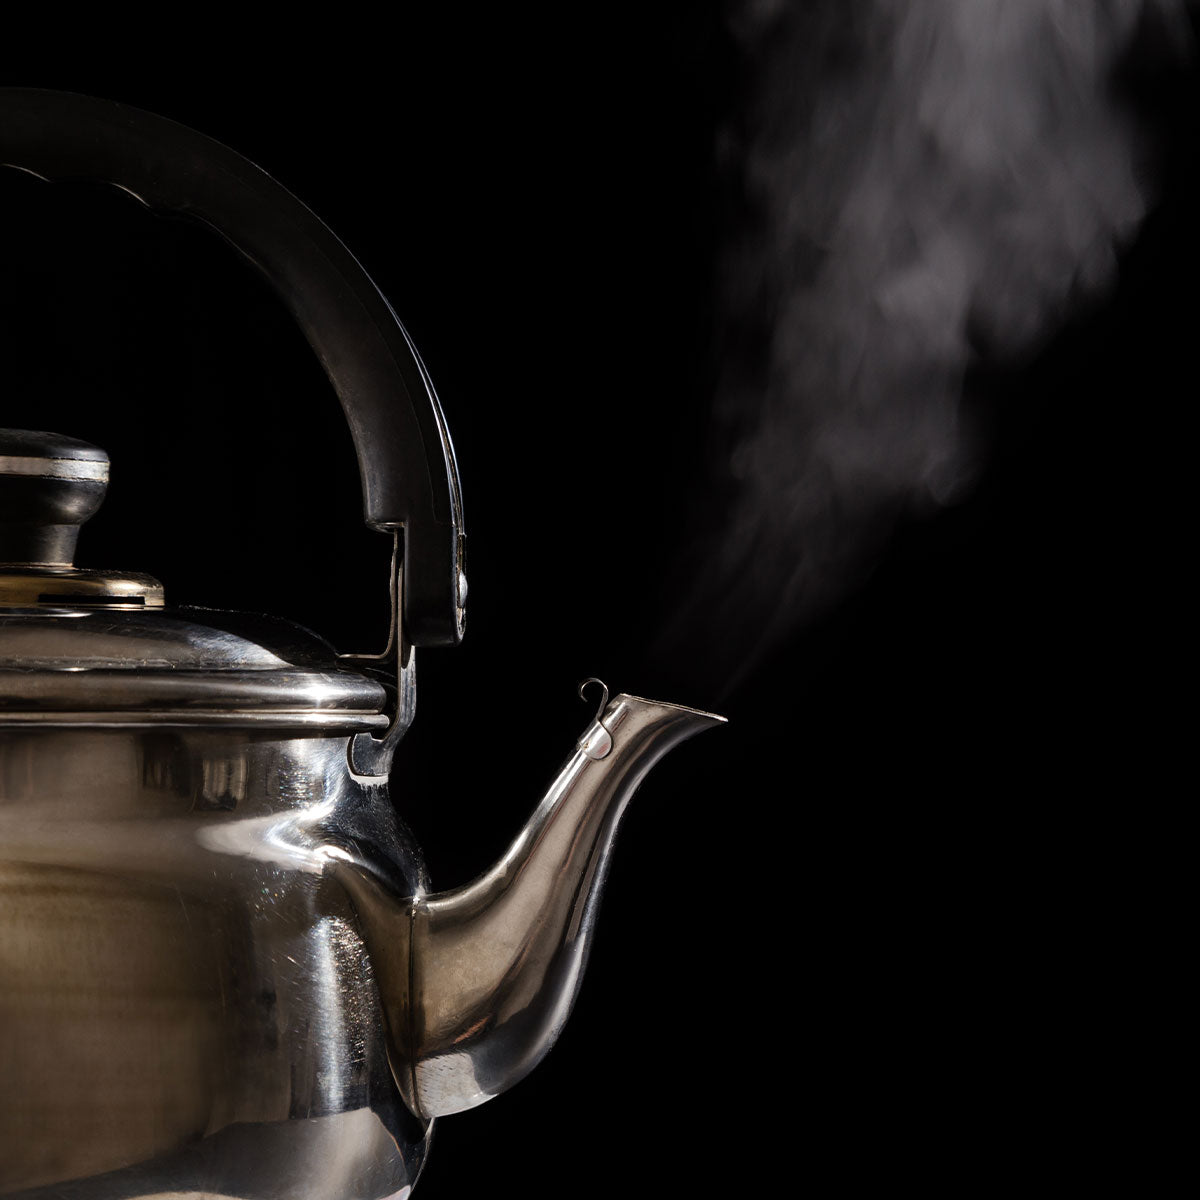 A kettle boiling with steam coming out of spout